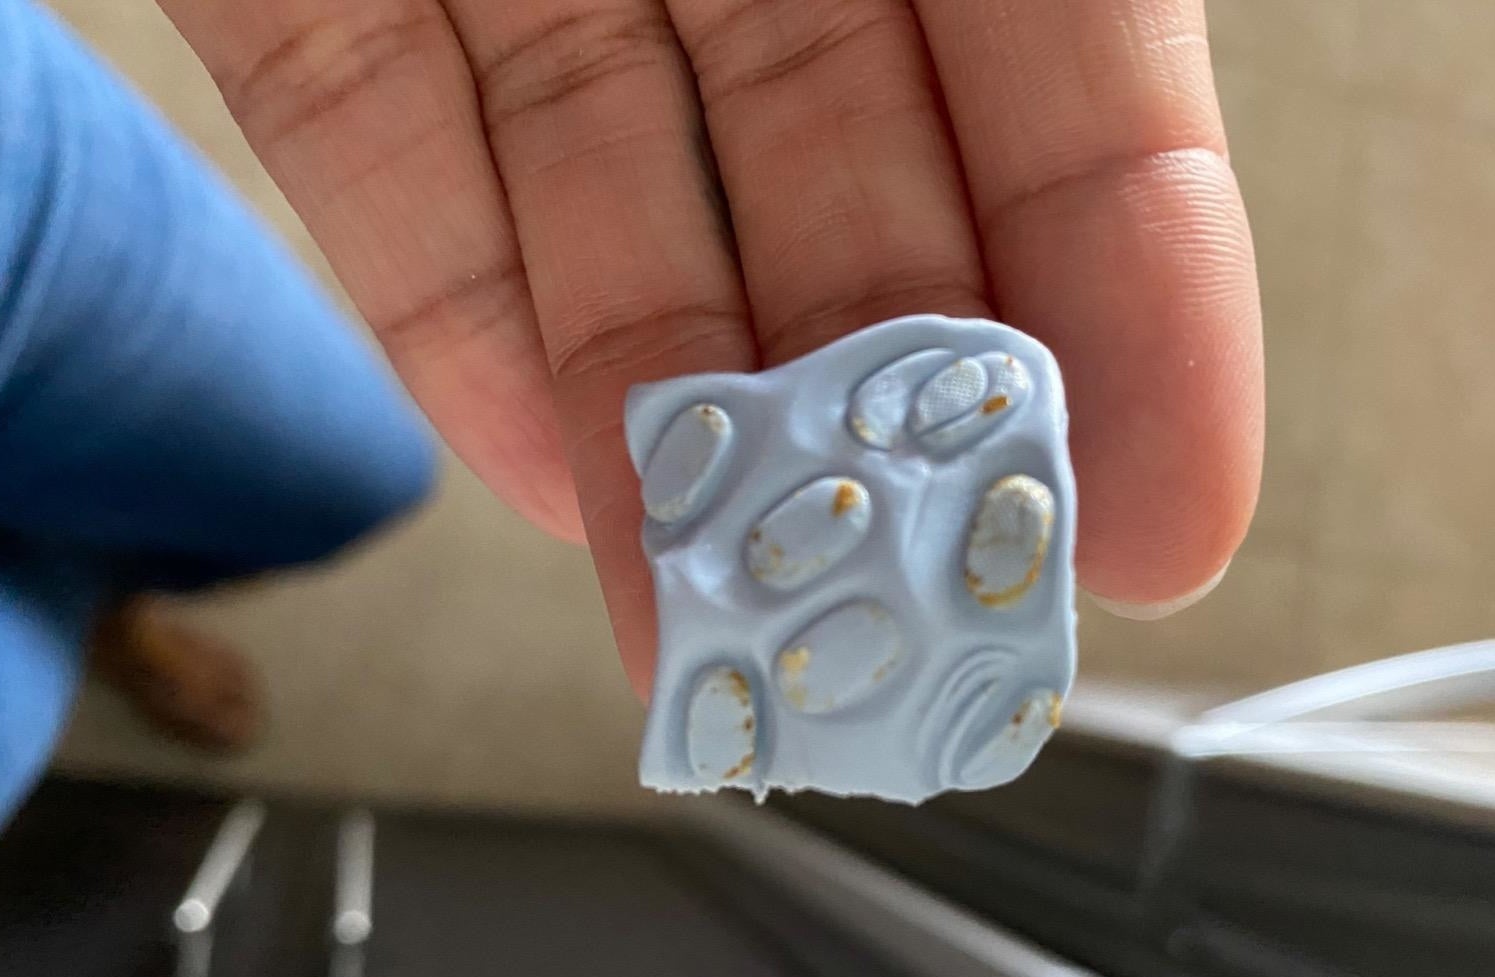 Blue square with lots of ear wax on it that was removed from an AirPod speaker